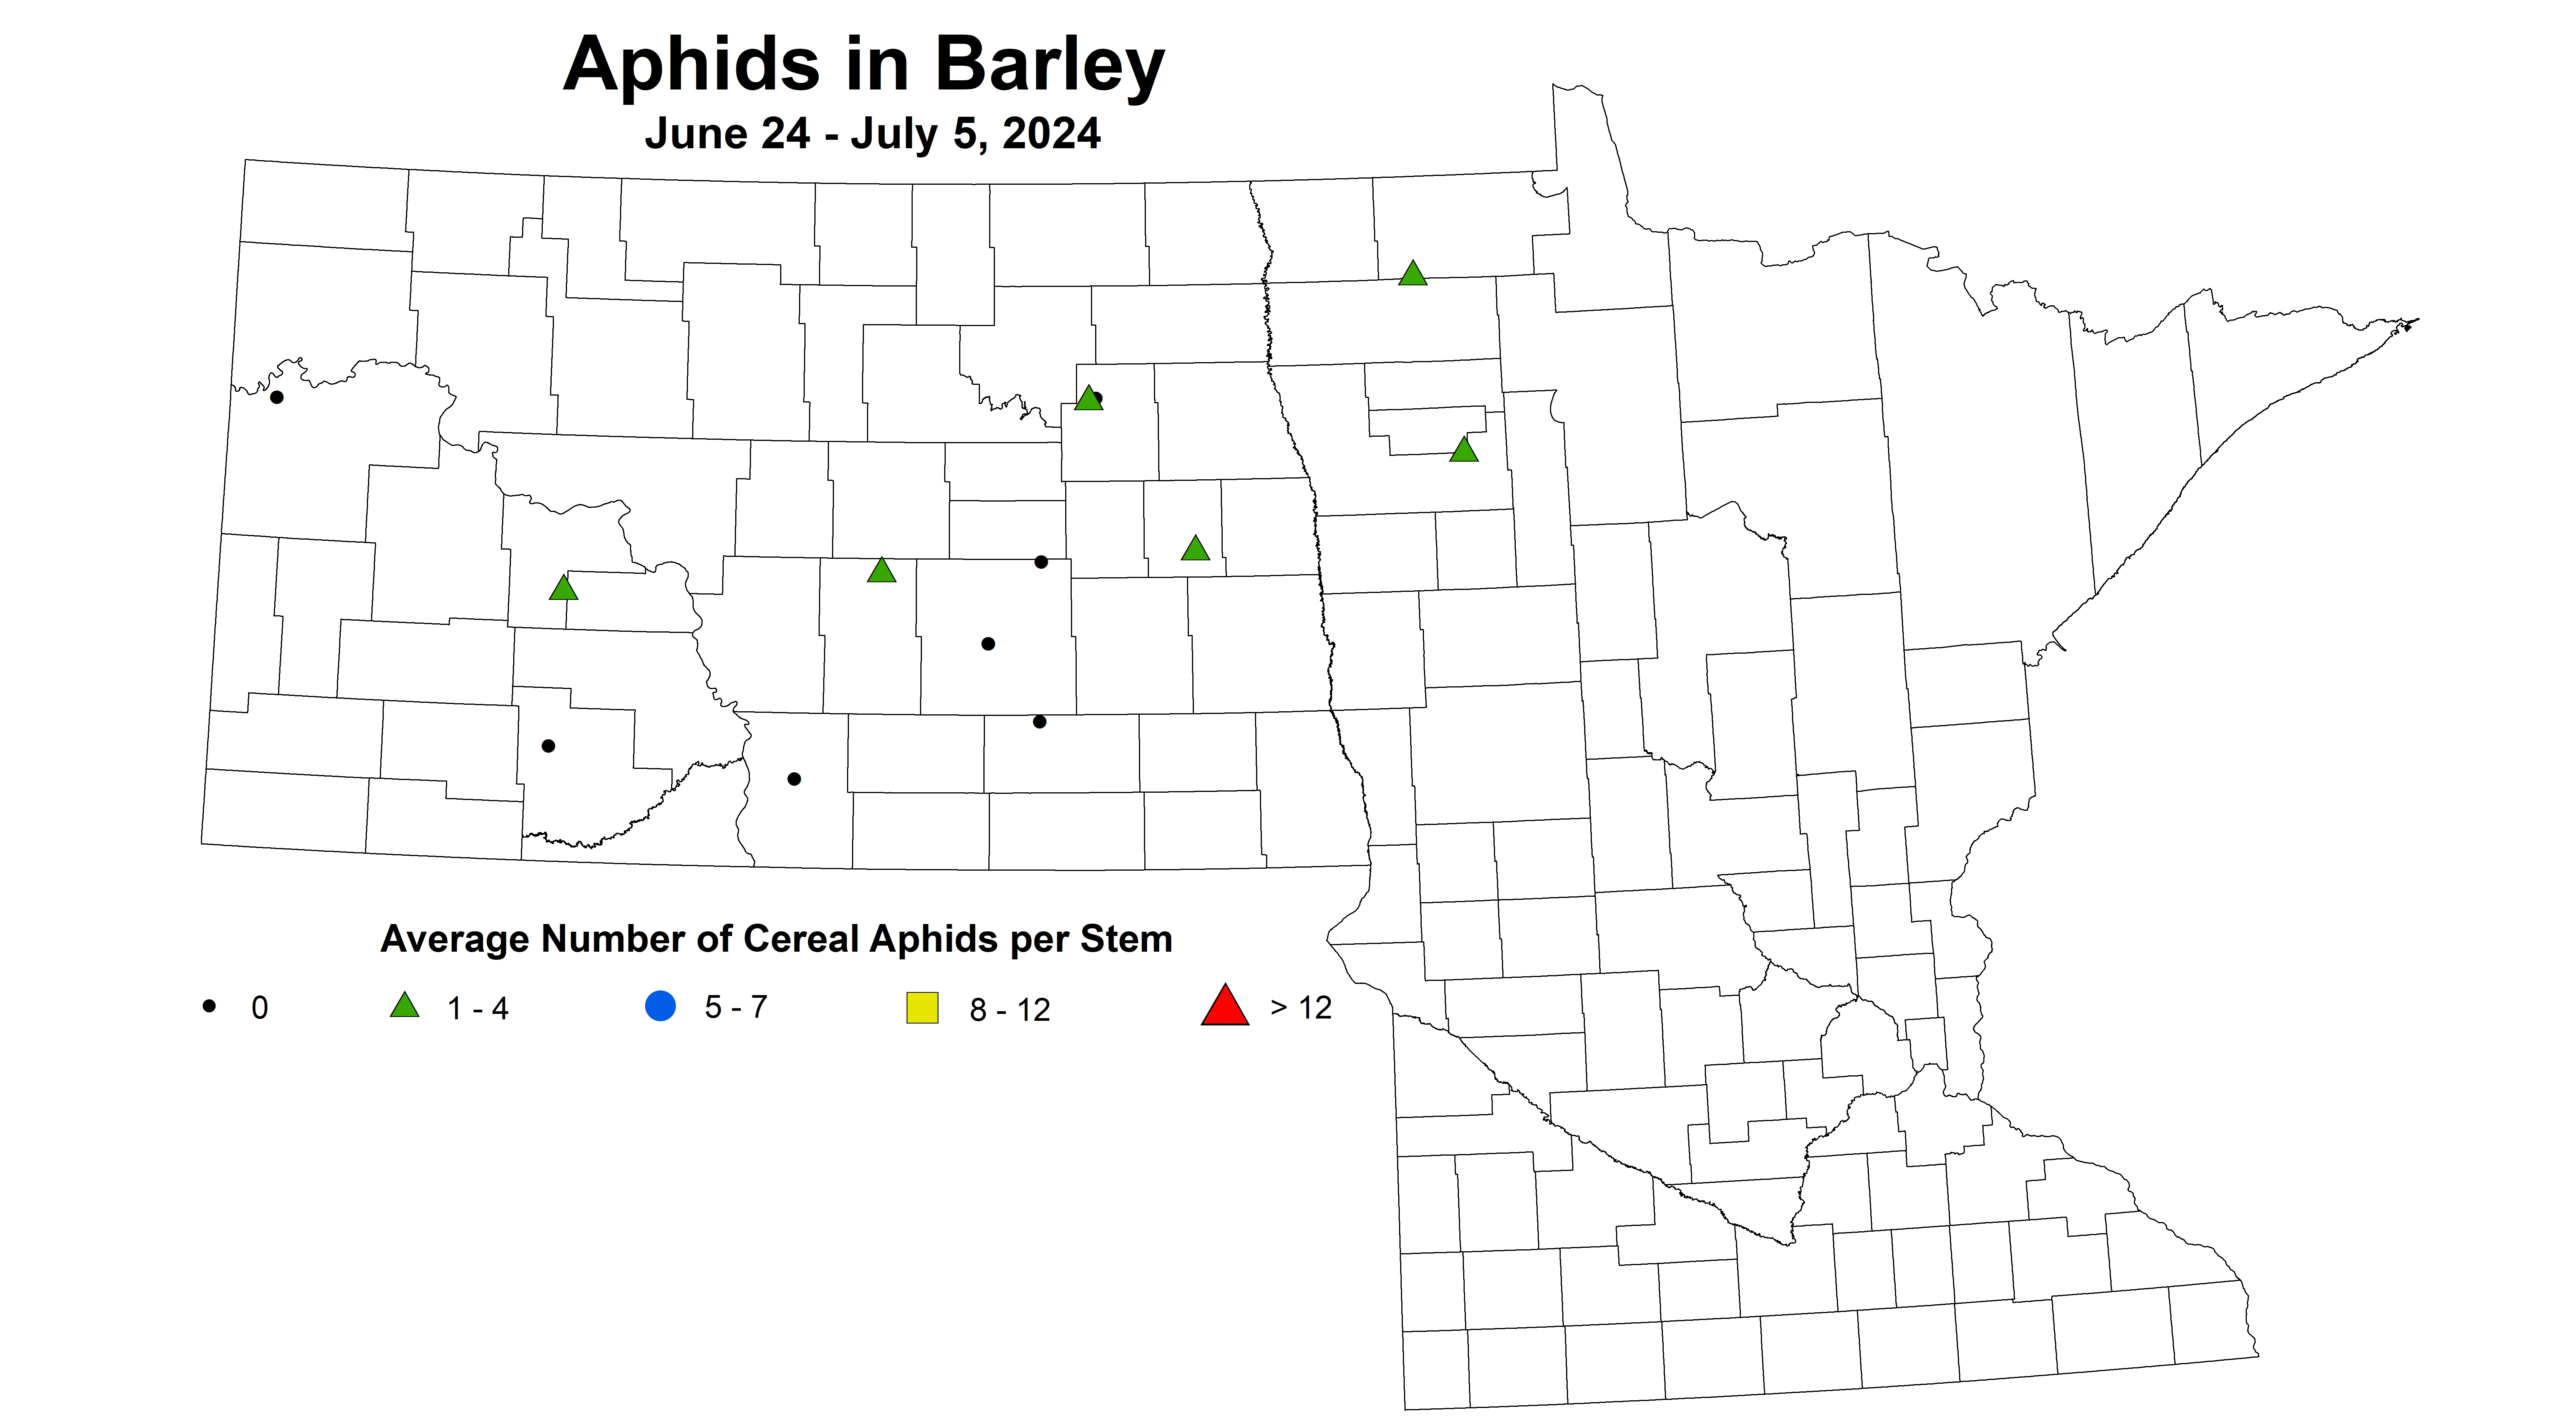 barley aphids June 24 to July 5 2024